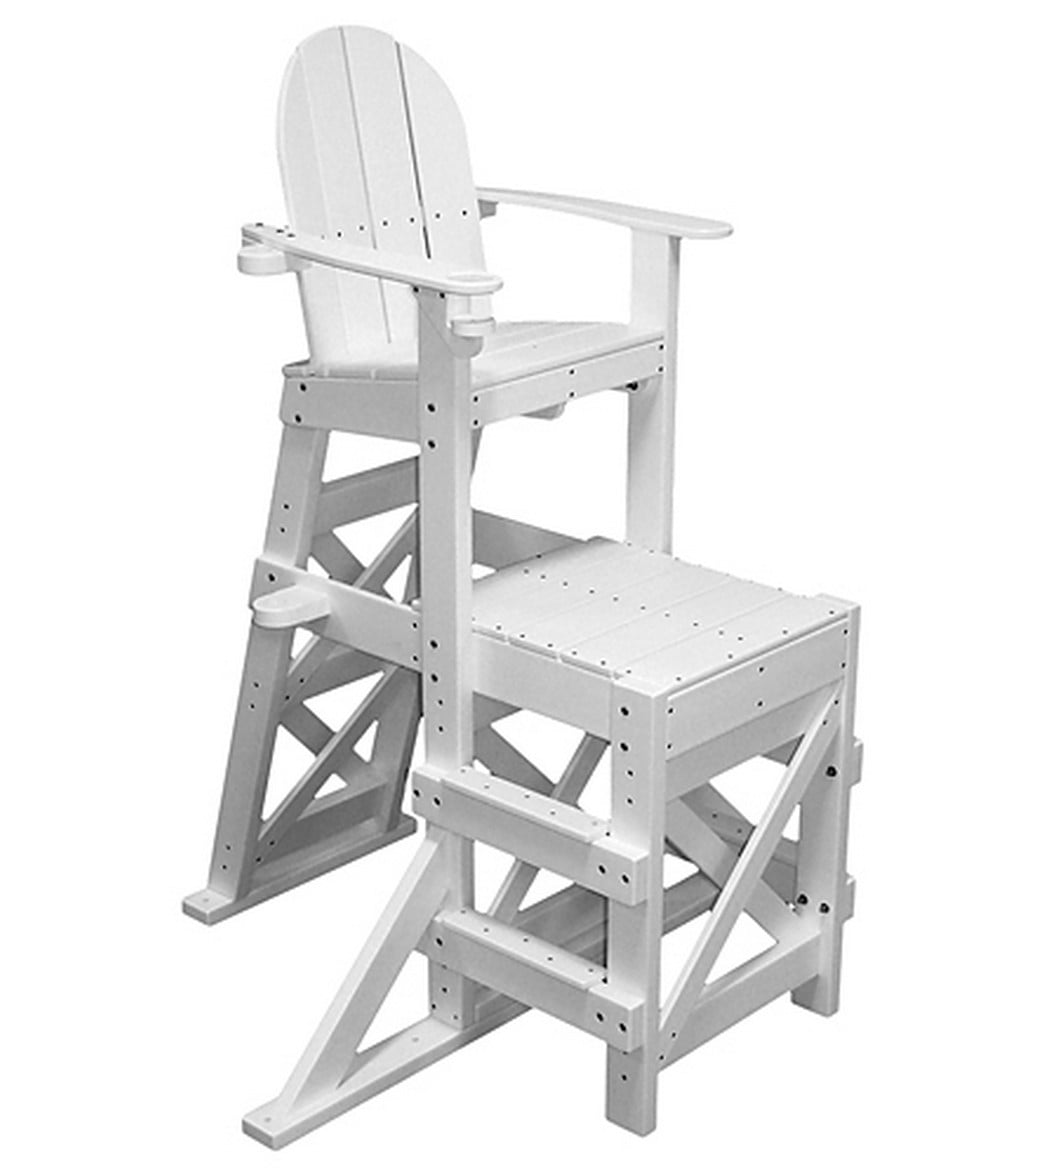 Tailwind Medium Recycled Plastic Lifeguard Chair w/Side